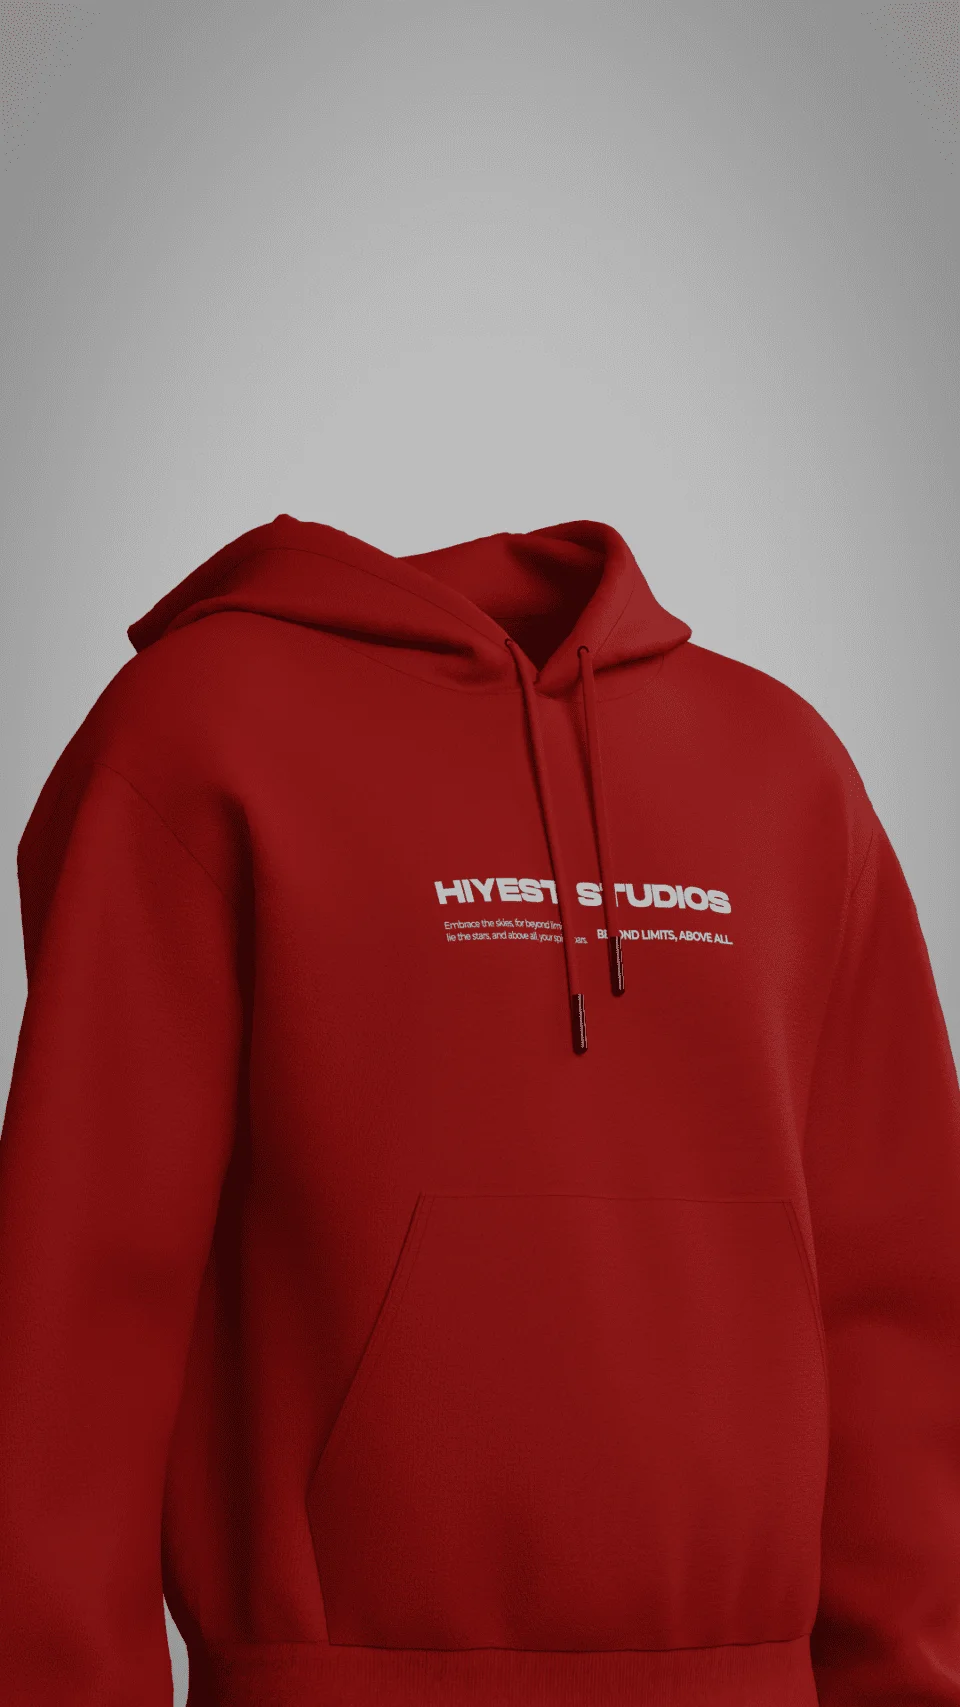 red red category, red category, top-rated red category on sale, category  online, category store near me, premium red oversized hoodie for men & women, affordable solid red category: hiyest studios